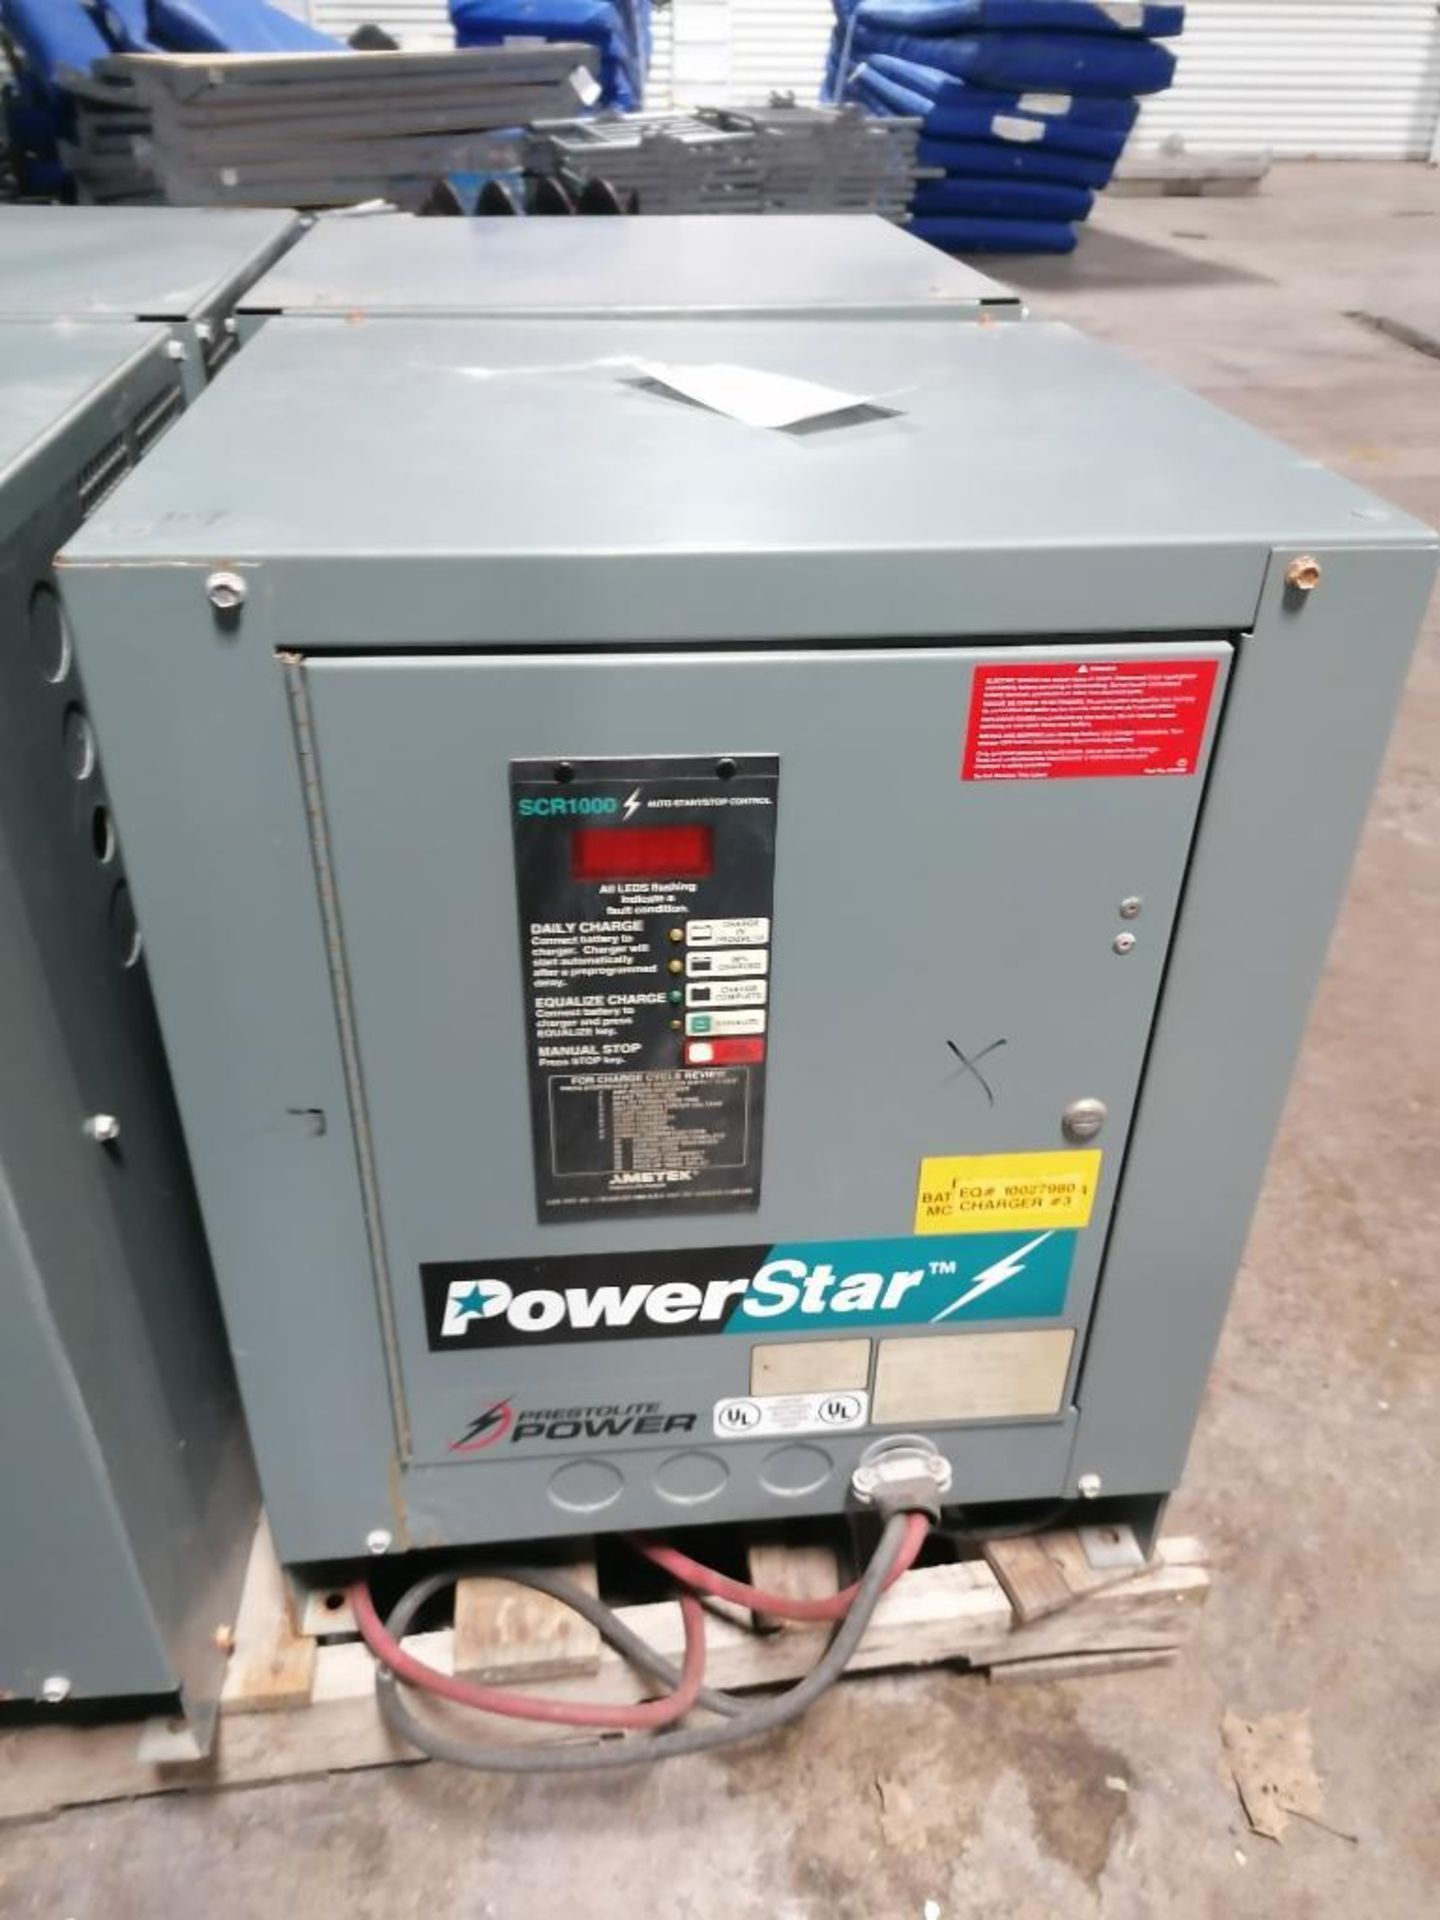 (4) PowerStar SCR1000 Industrial Forklift Battery Charger, Model 98Y3-12, Serial #404CS21472, Serial - Image 7 of 19